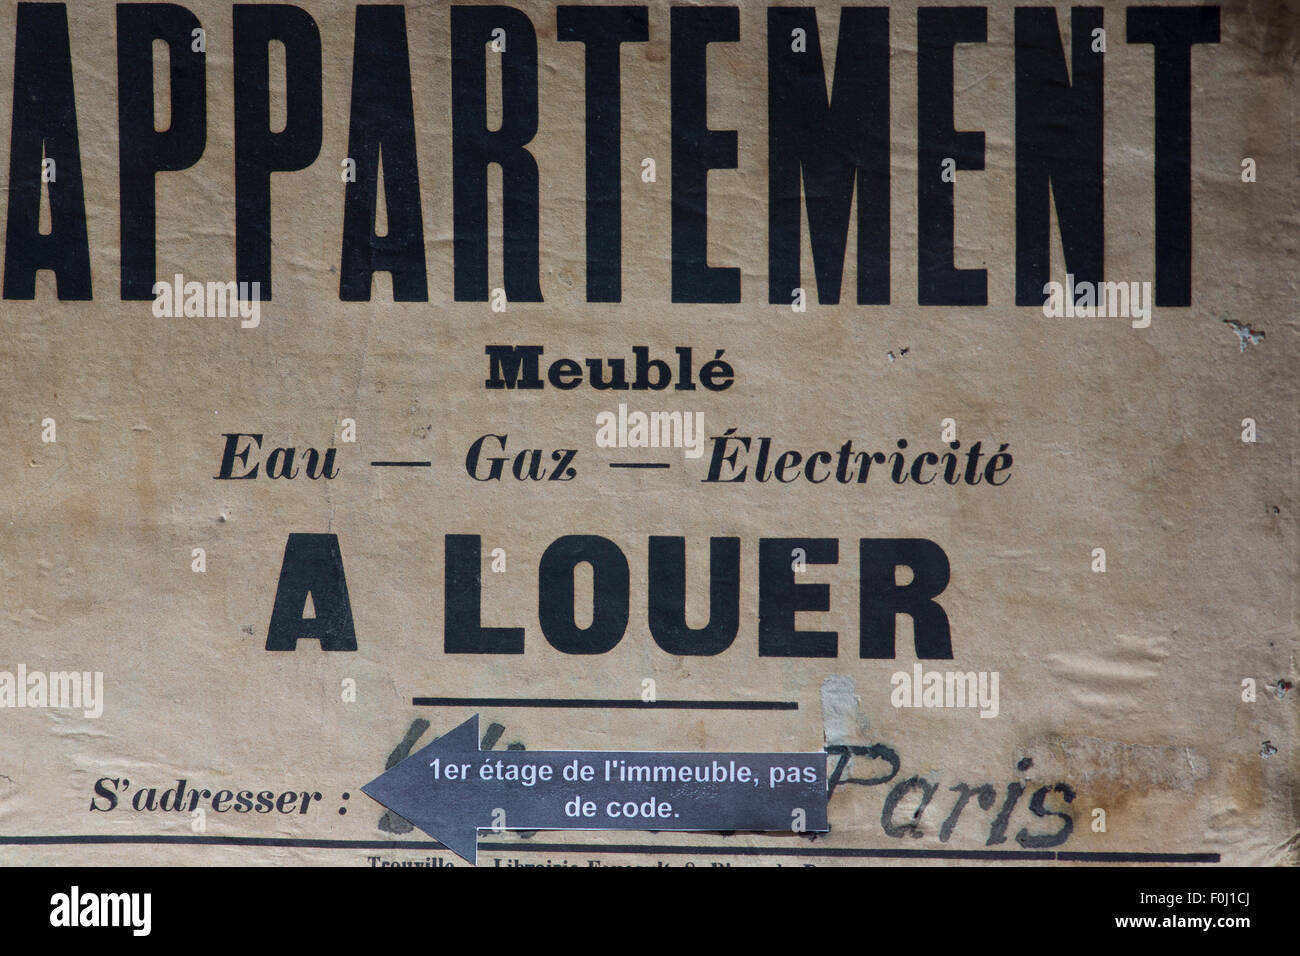 Vintage real estate sign for rent apartment in Paris, France Stock Photo